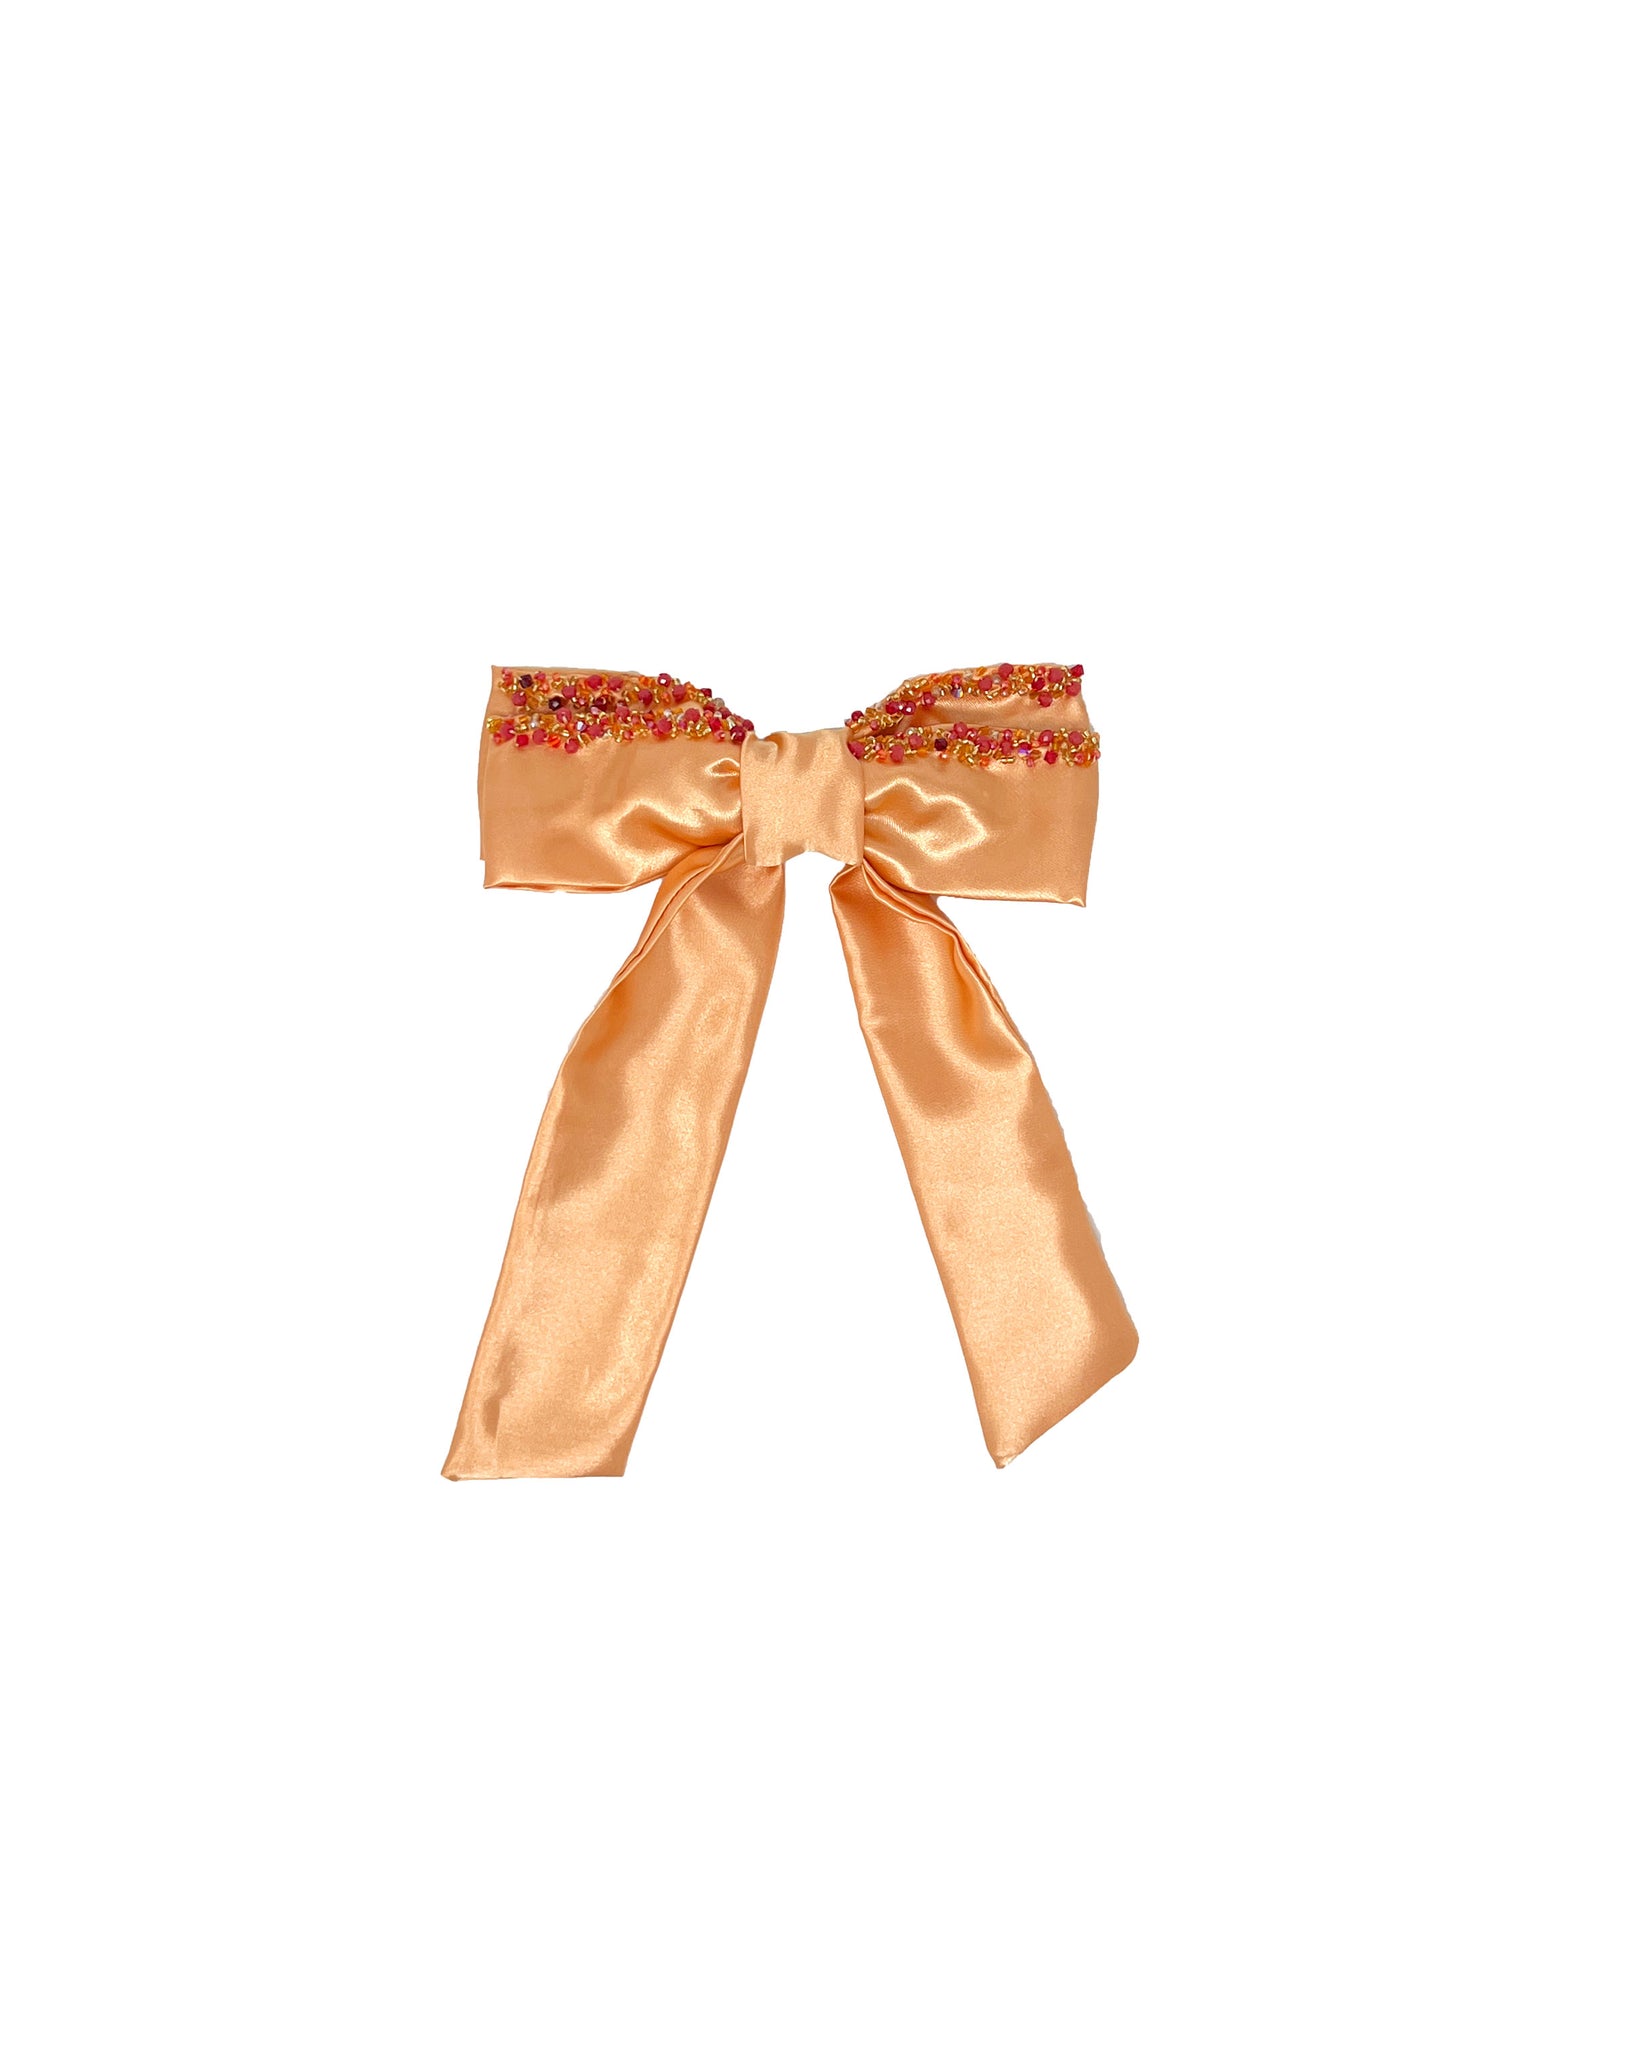 Double orange satin hair bow with embroidered crystals